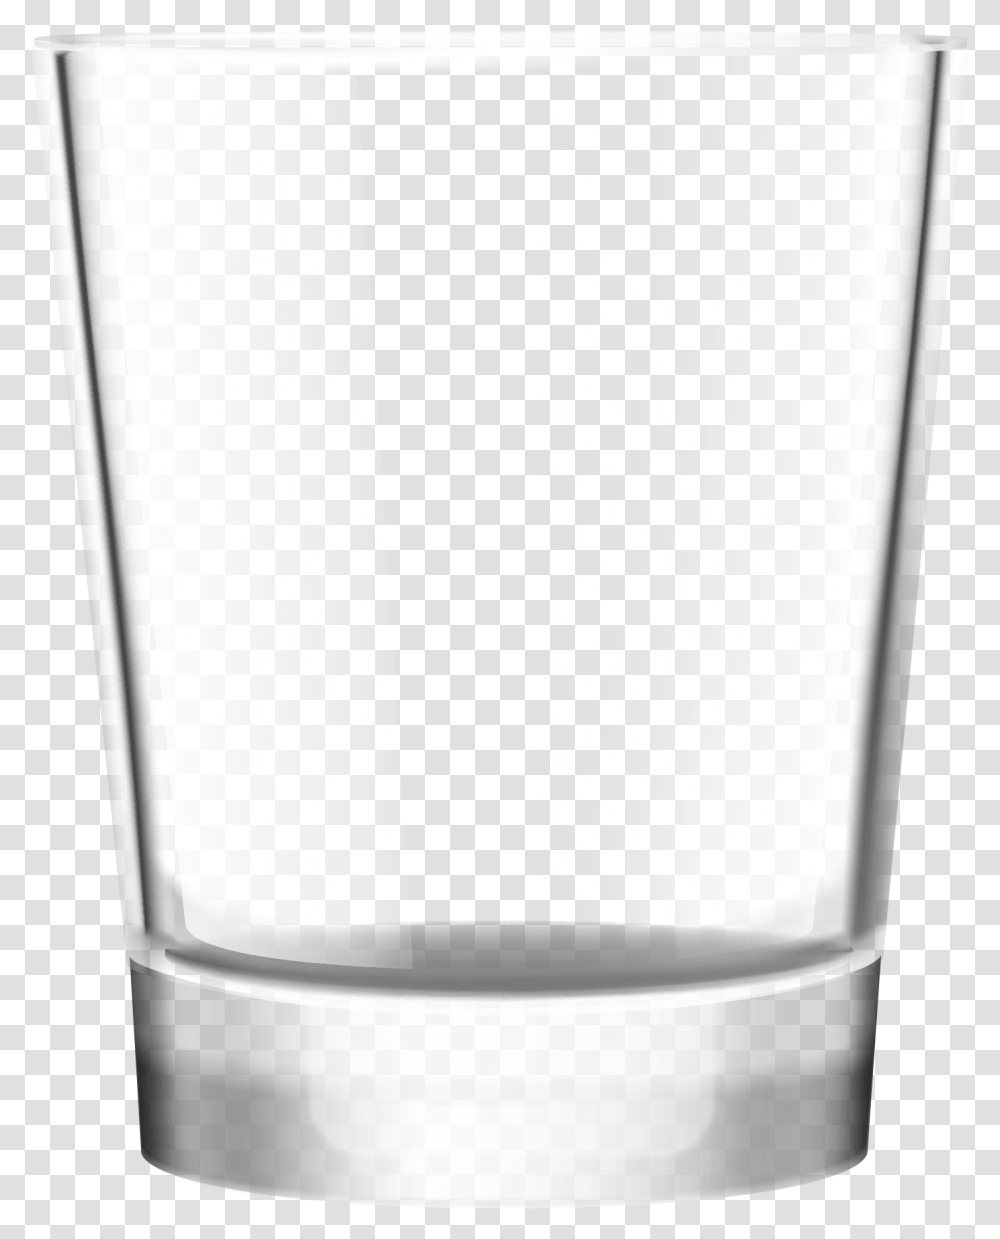 Water Glass Hd Image Free Download Water Glass Pmg Hd, Beverage, Drink, Alcohol, Beer Glass Transparent Png